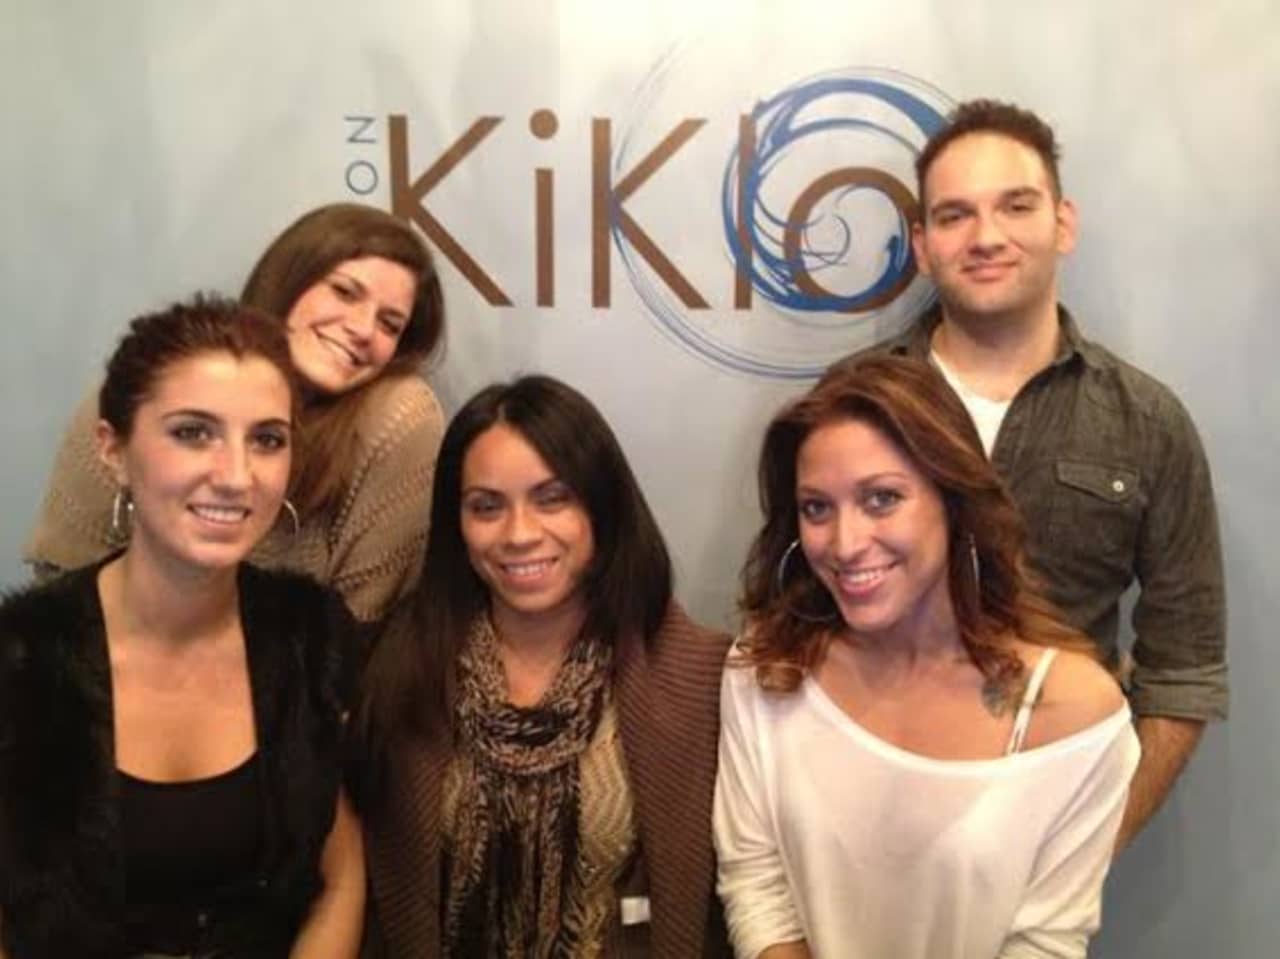 Salon Kiklo in New Canaan will host "Cuts For a Cause" to support Kids Helping Kids in May.